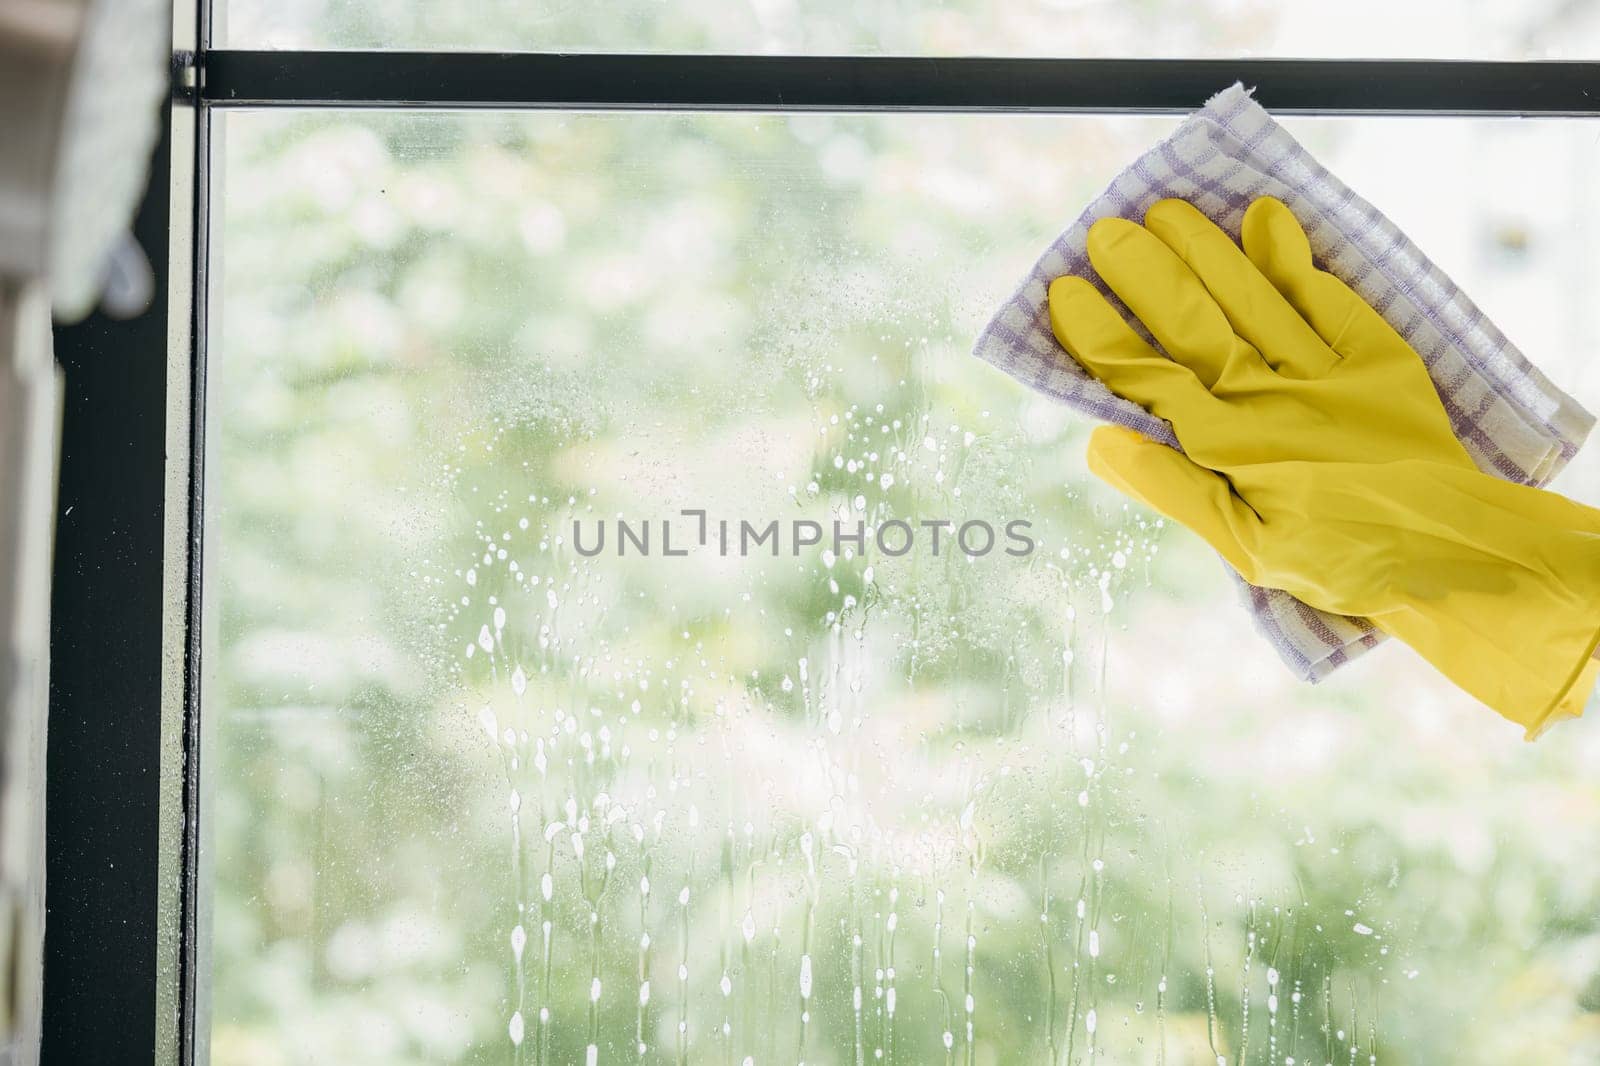 A smiling woman dedicated to housework sprays and wipes office windows. Her emphasis on purity hygiene and transparent cleanliness ensures sparkling spotless windows. by Sorapop